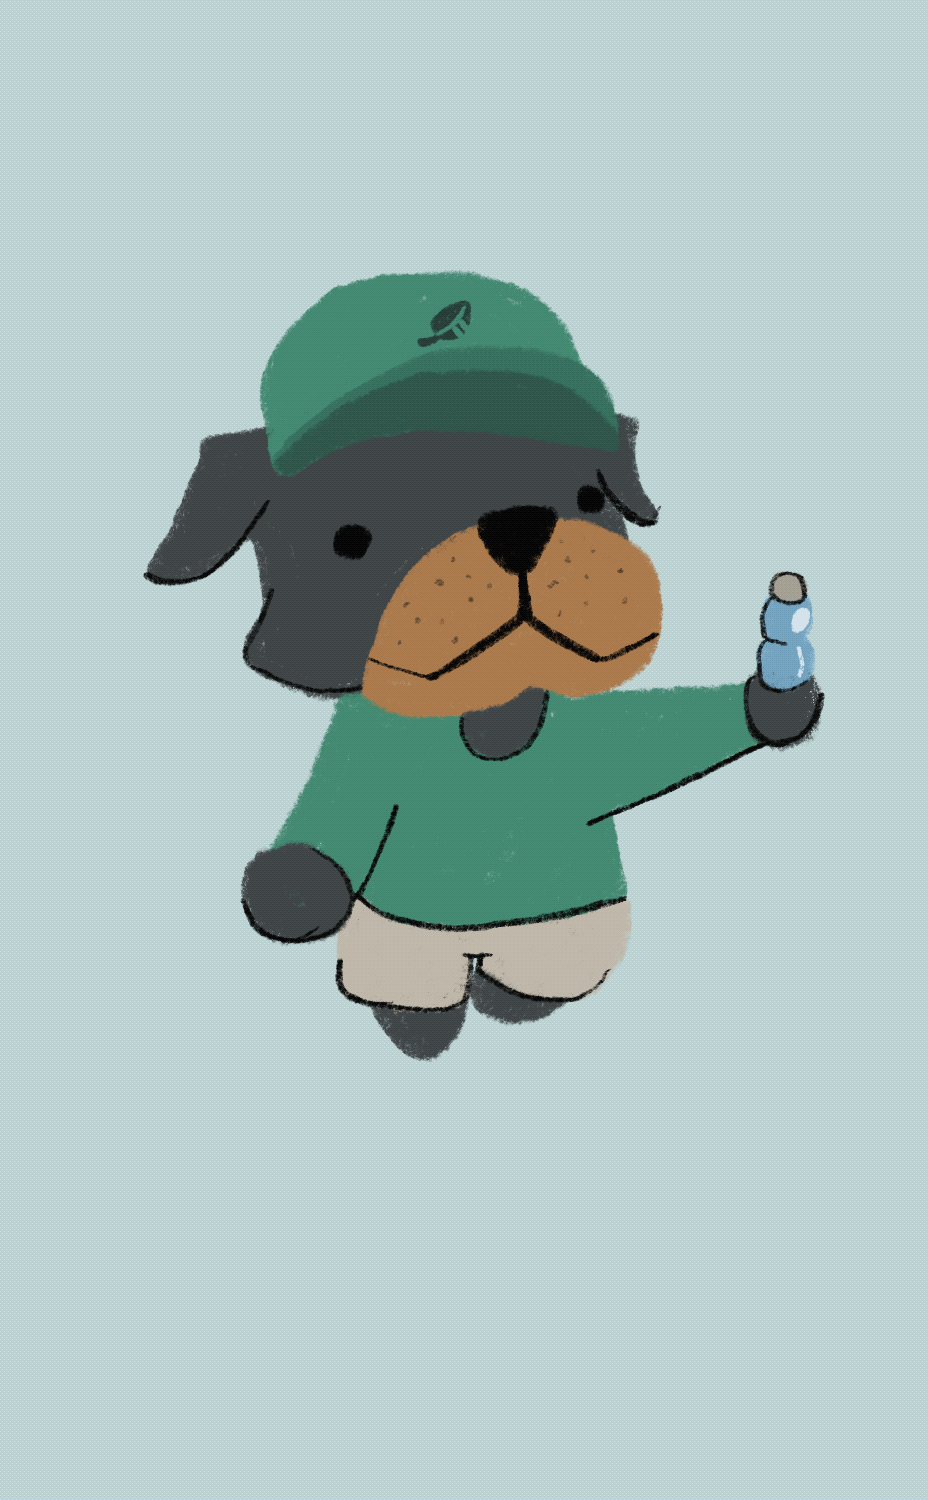 Dog wearing a green hat, and beige shorts holding a water bottle